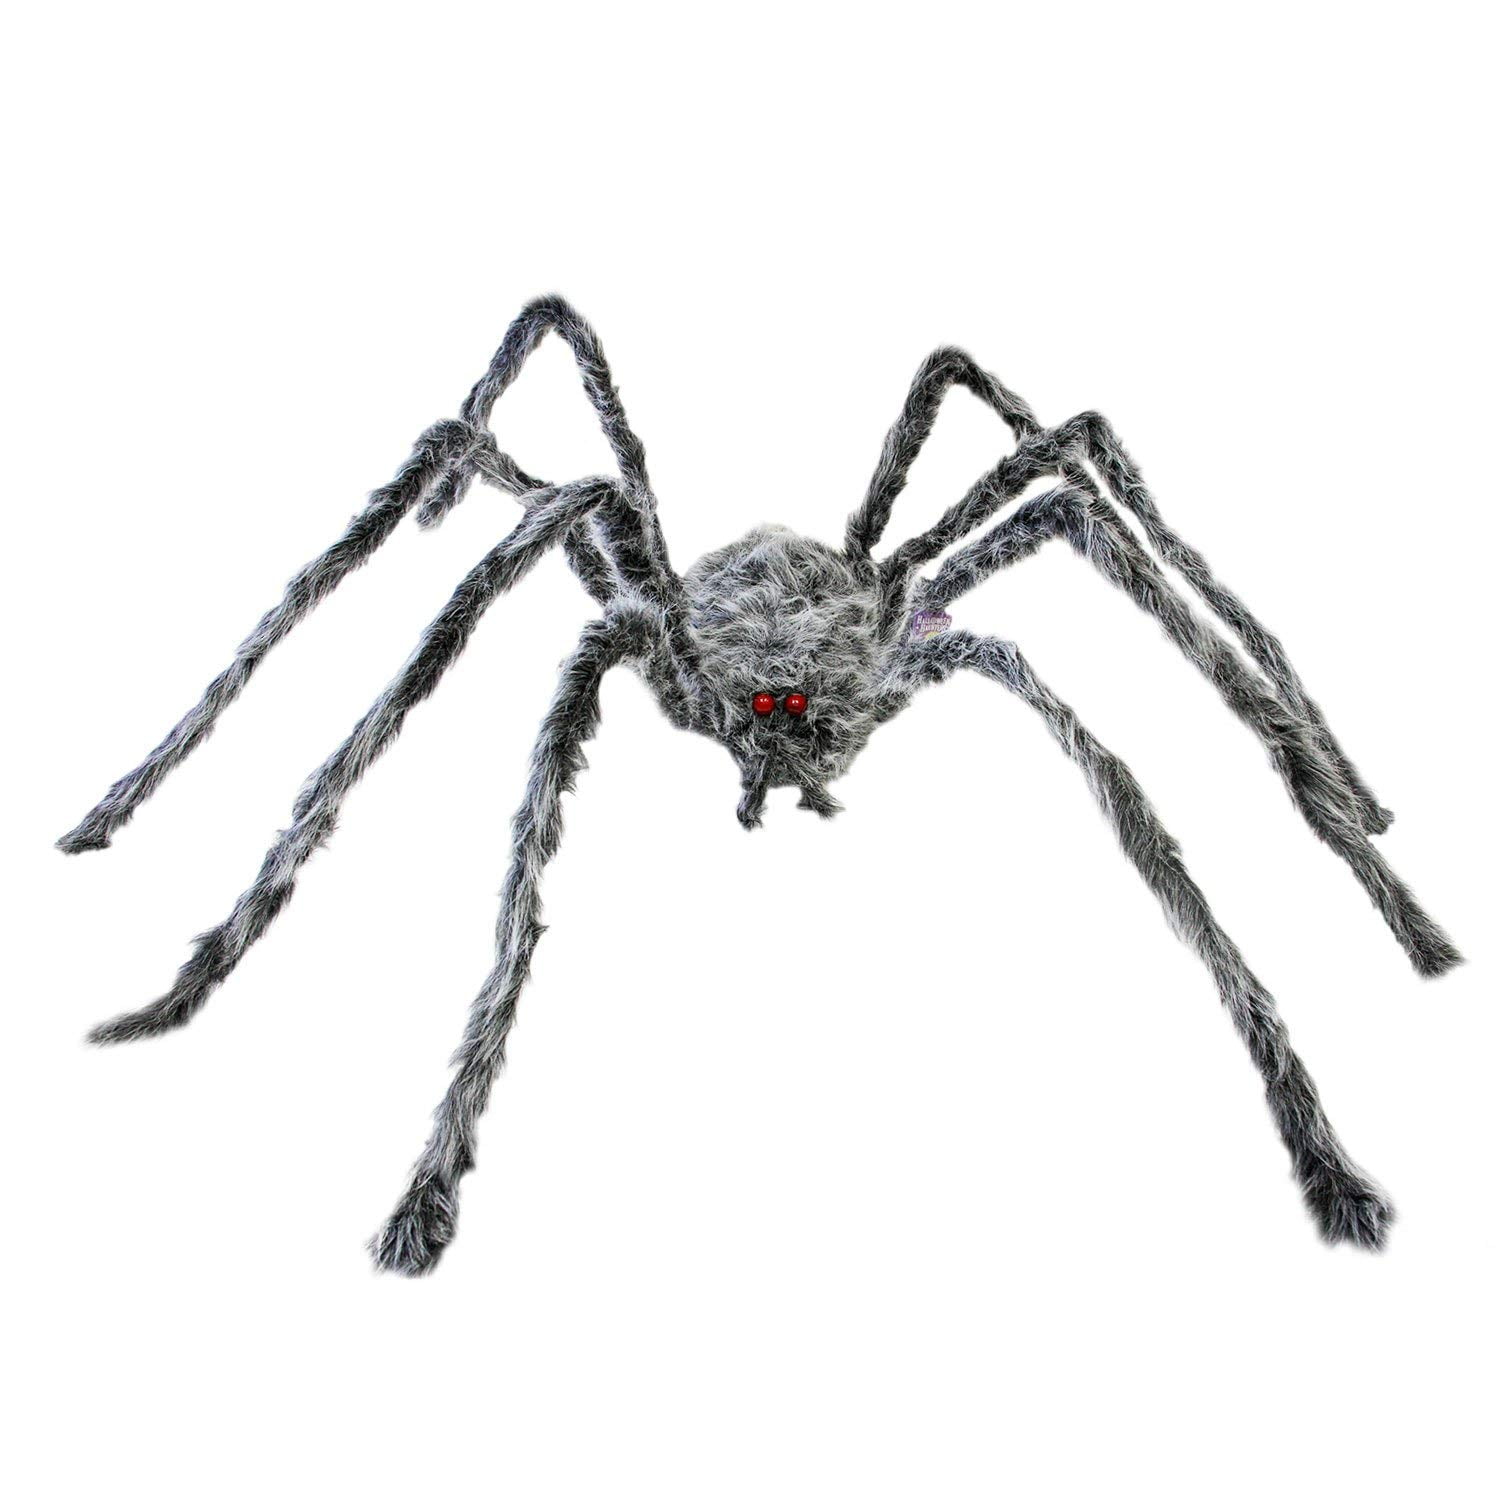 6 Foot Oversized Realistic Spider Prop Decoration - Huge Creepy Crawly ...